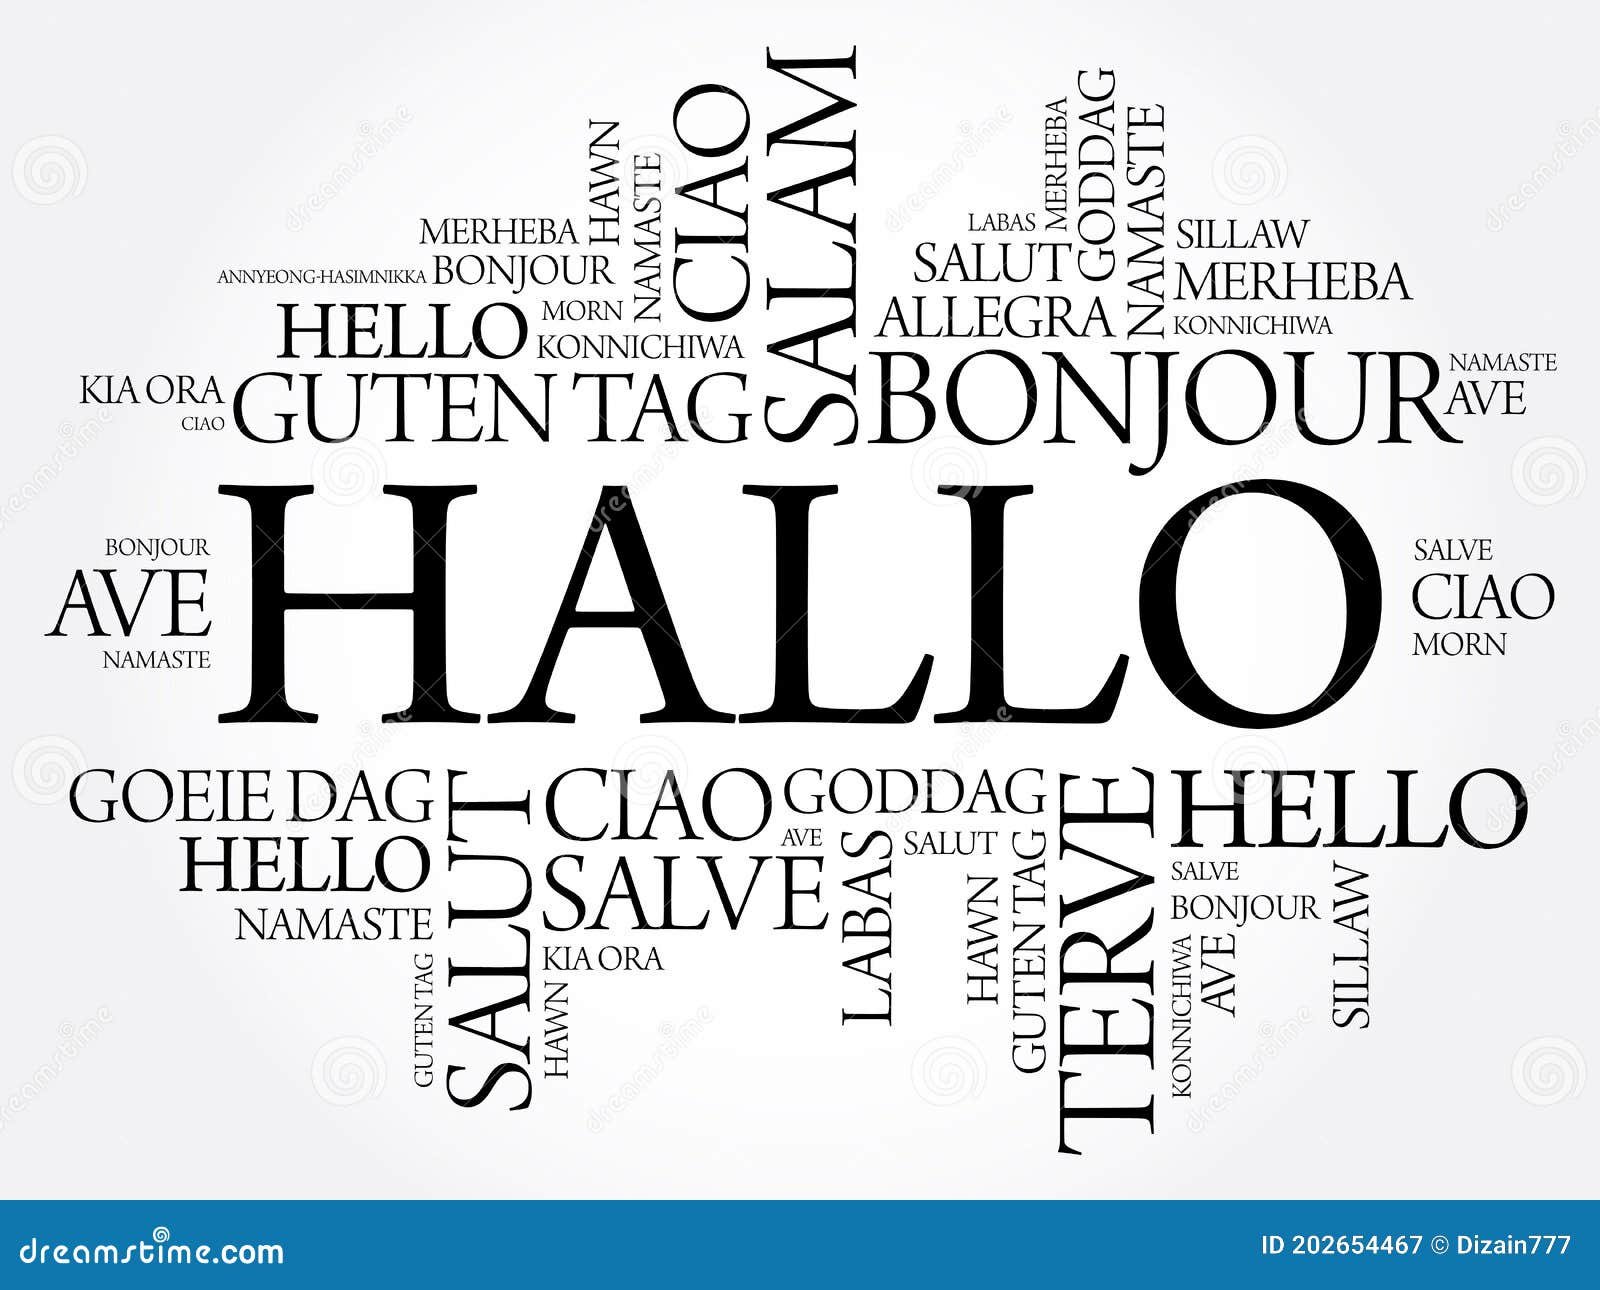 Hallo Hello Greeting In German Word Cloud In Different Languages